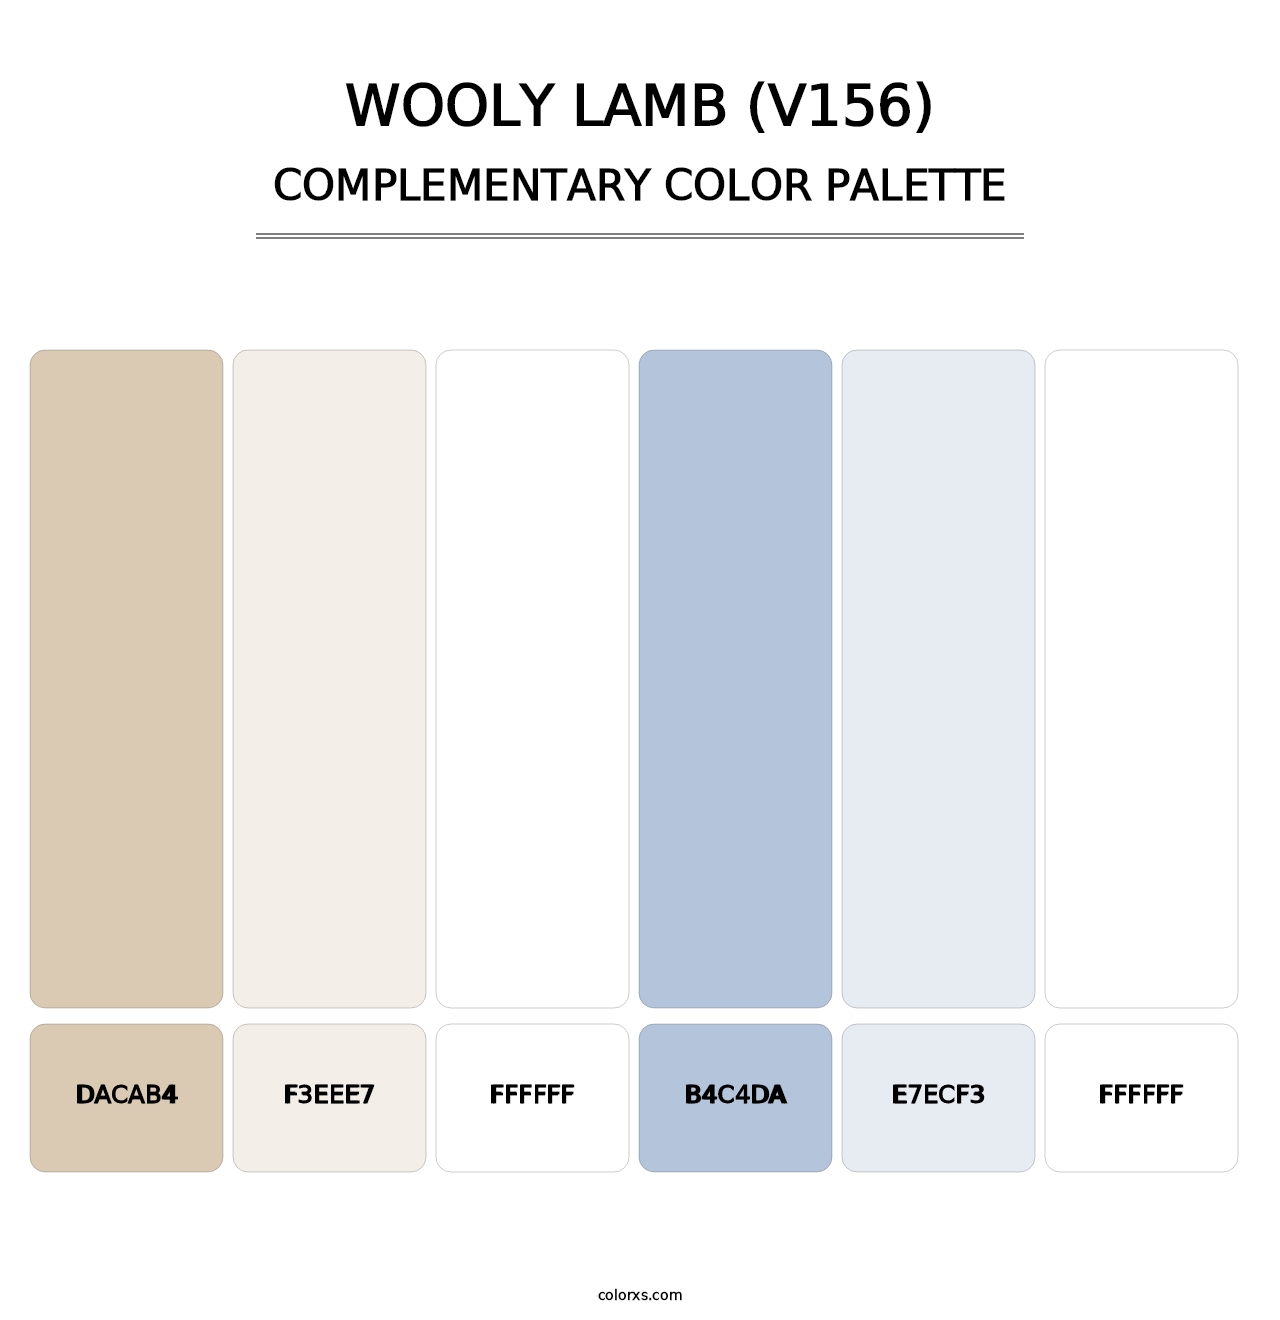 Wooly Lamb (V156) - Complementary Color Palette